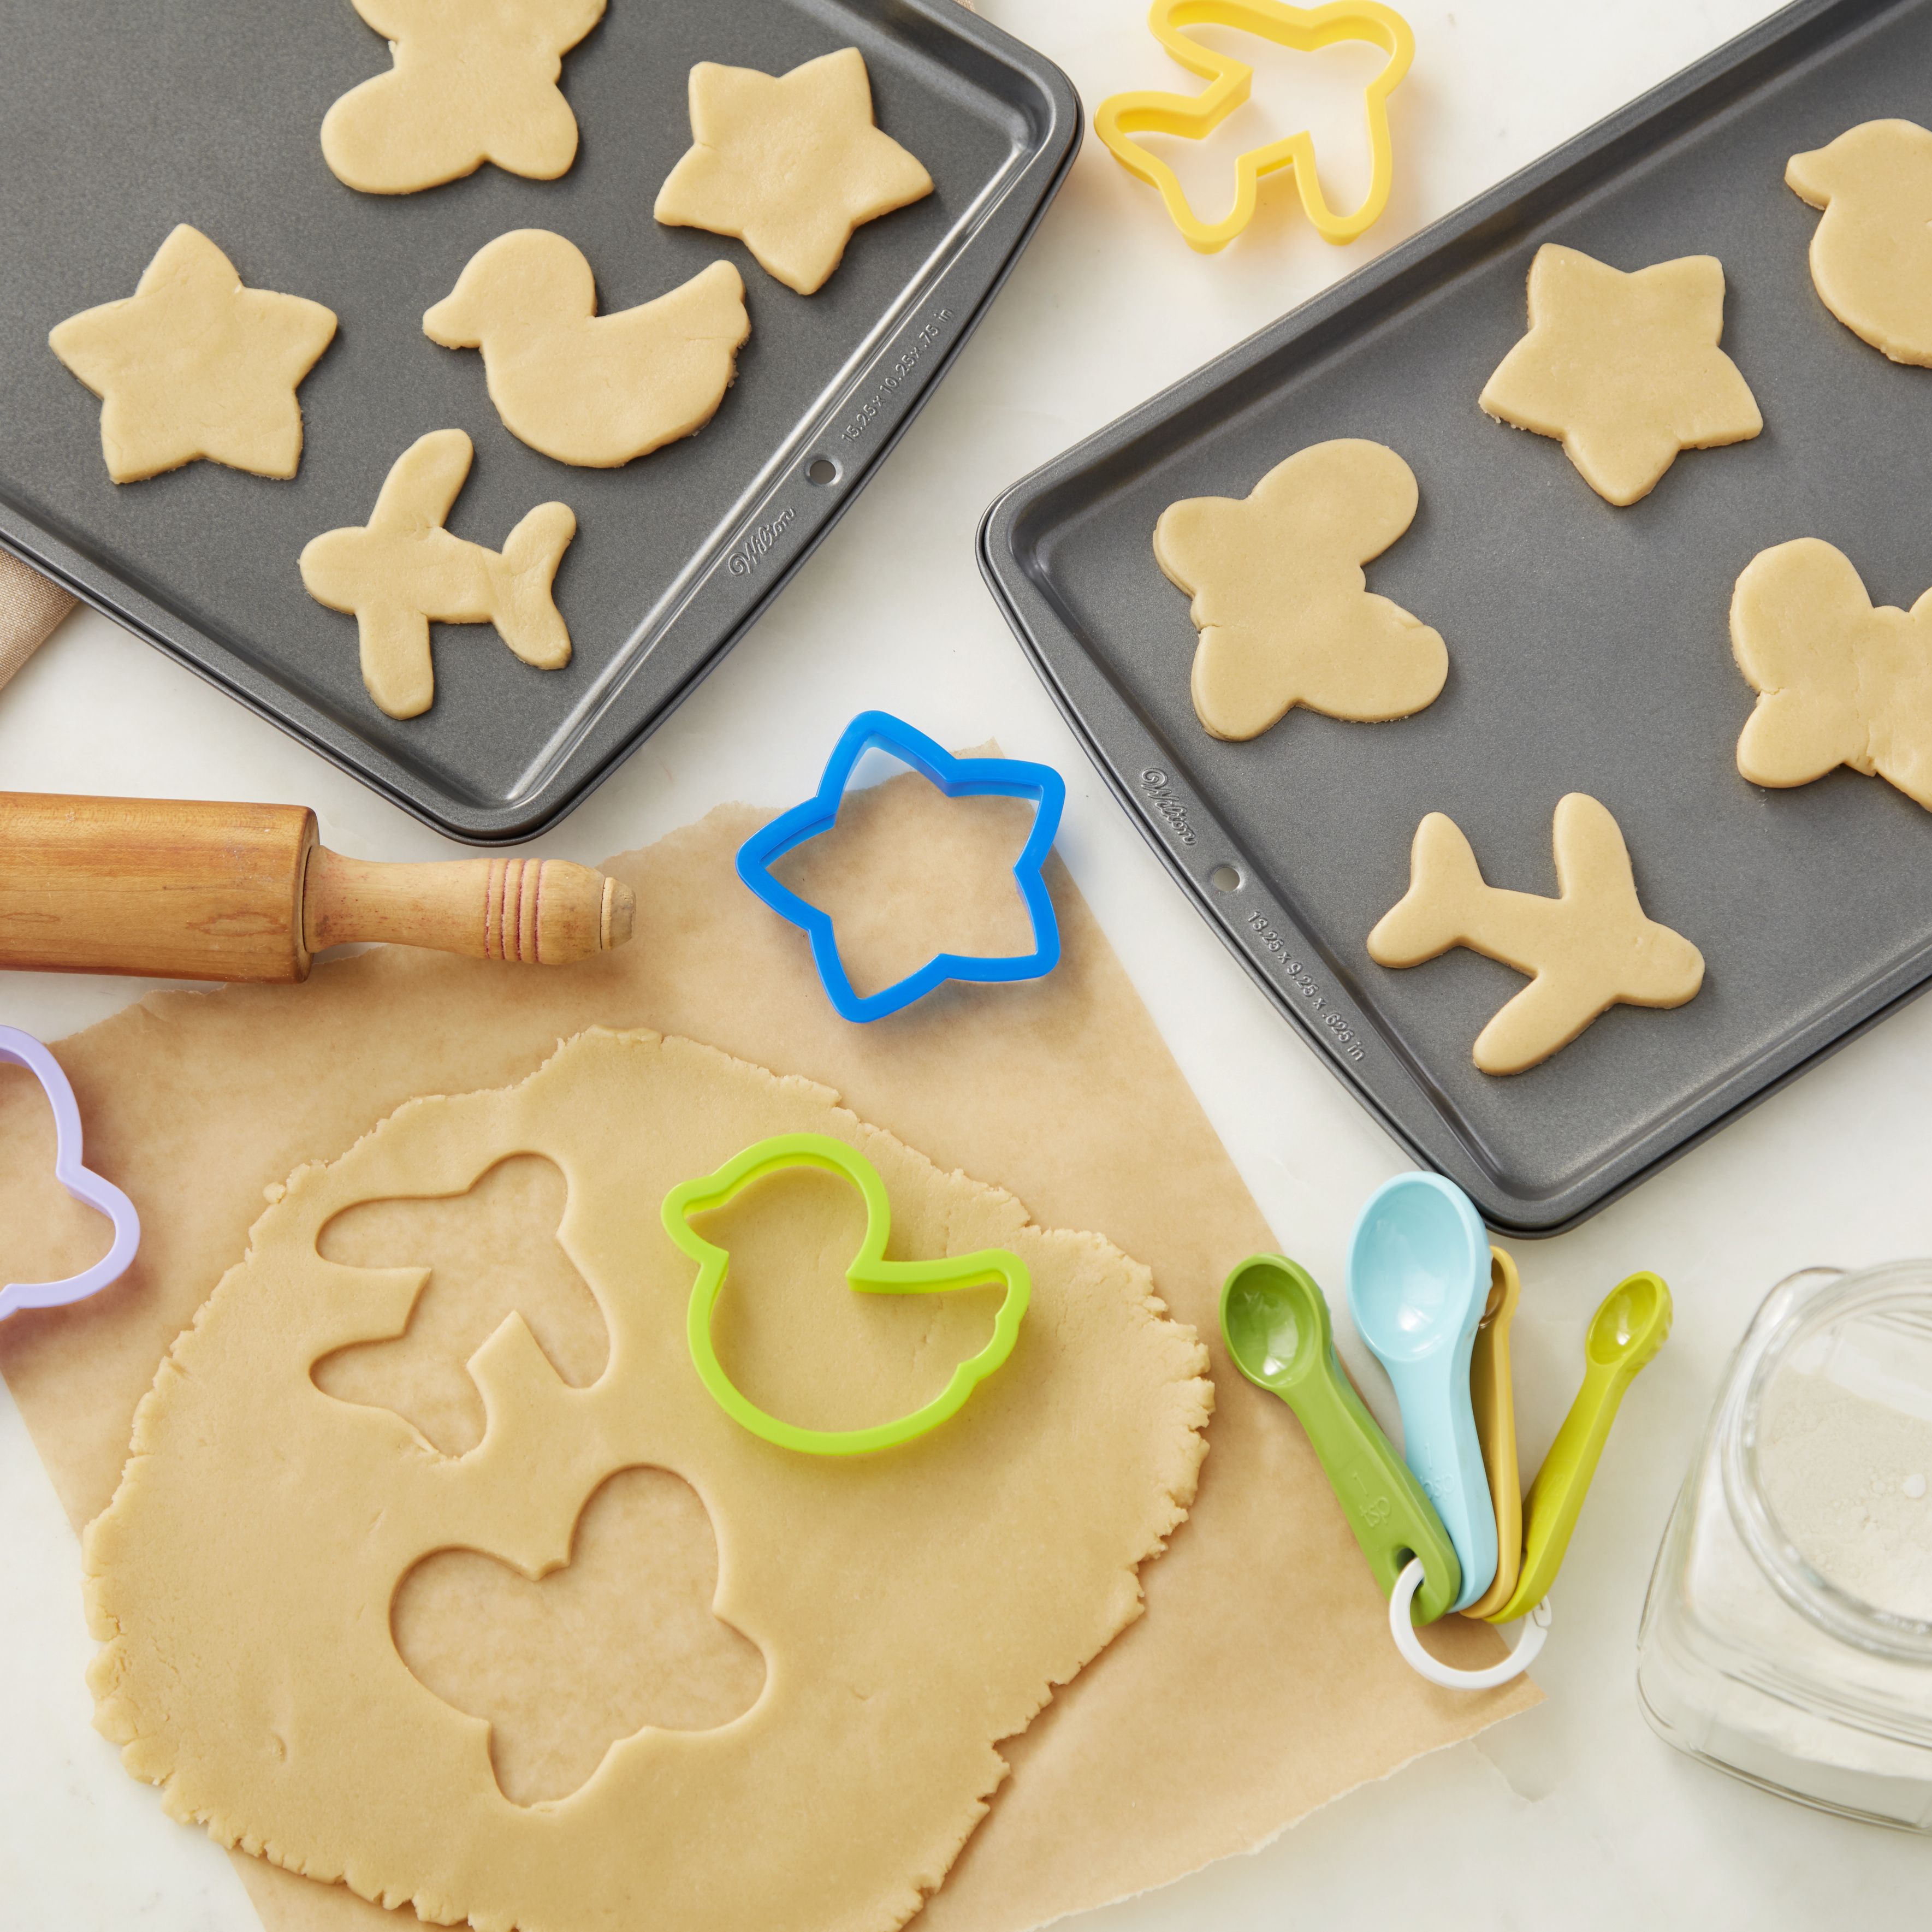 9 Best Cookie Sheets For Baking In 2021 - Shop Baking Sheets